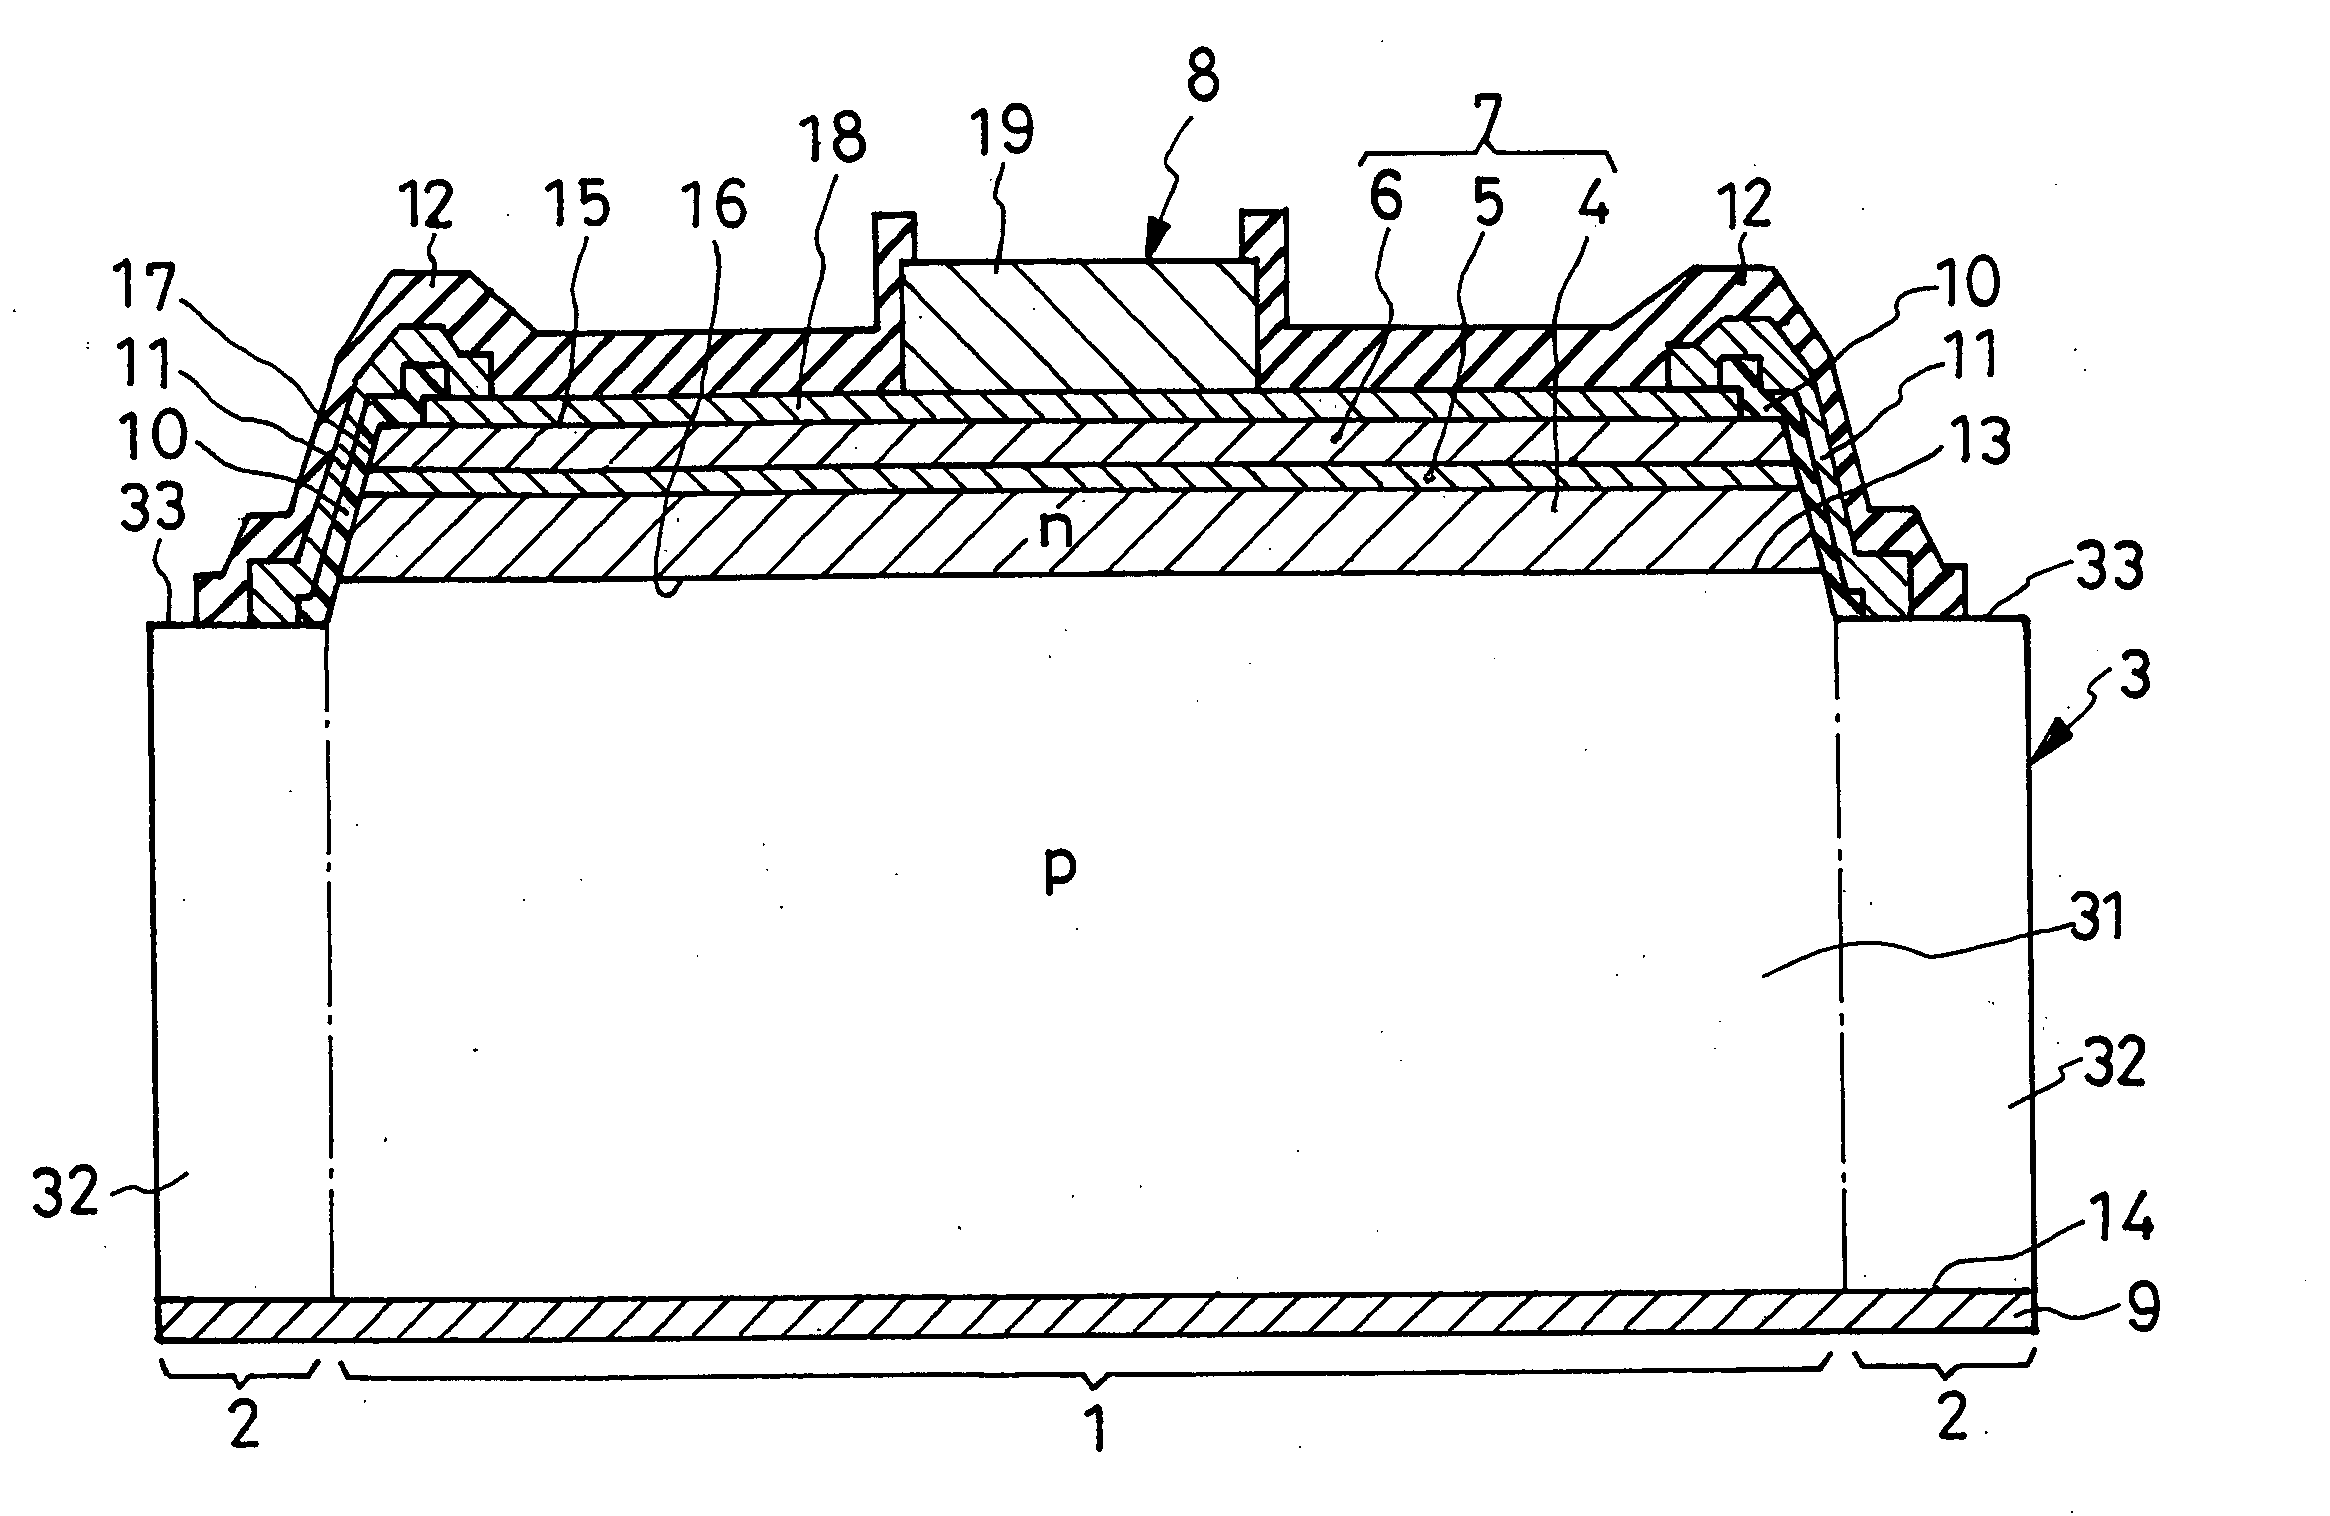 Overvoltage-protected light-emitting semiconductor device